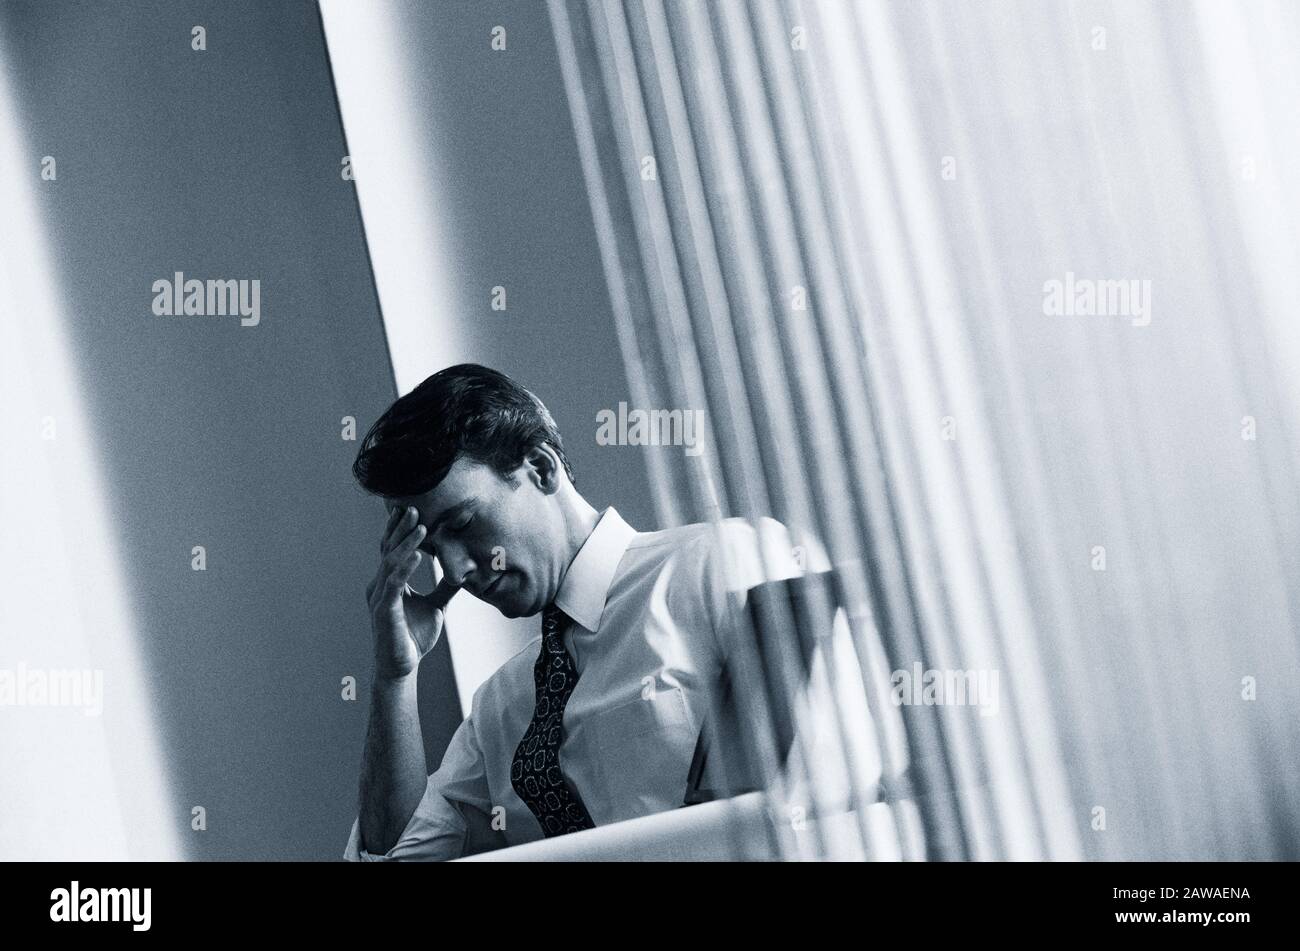 Polapan film image of an Executive in his office with a stress induced headache Stock Photo